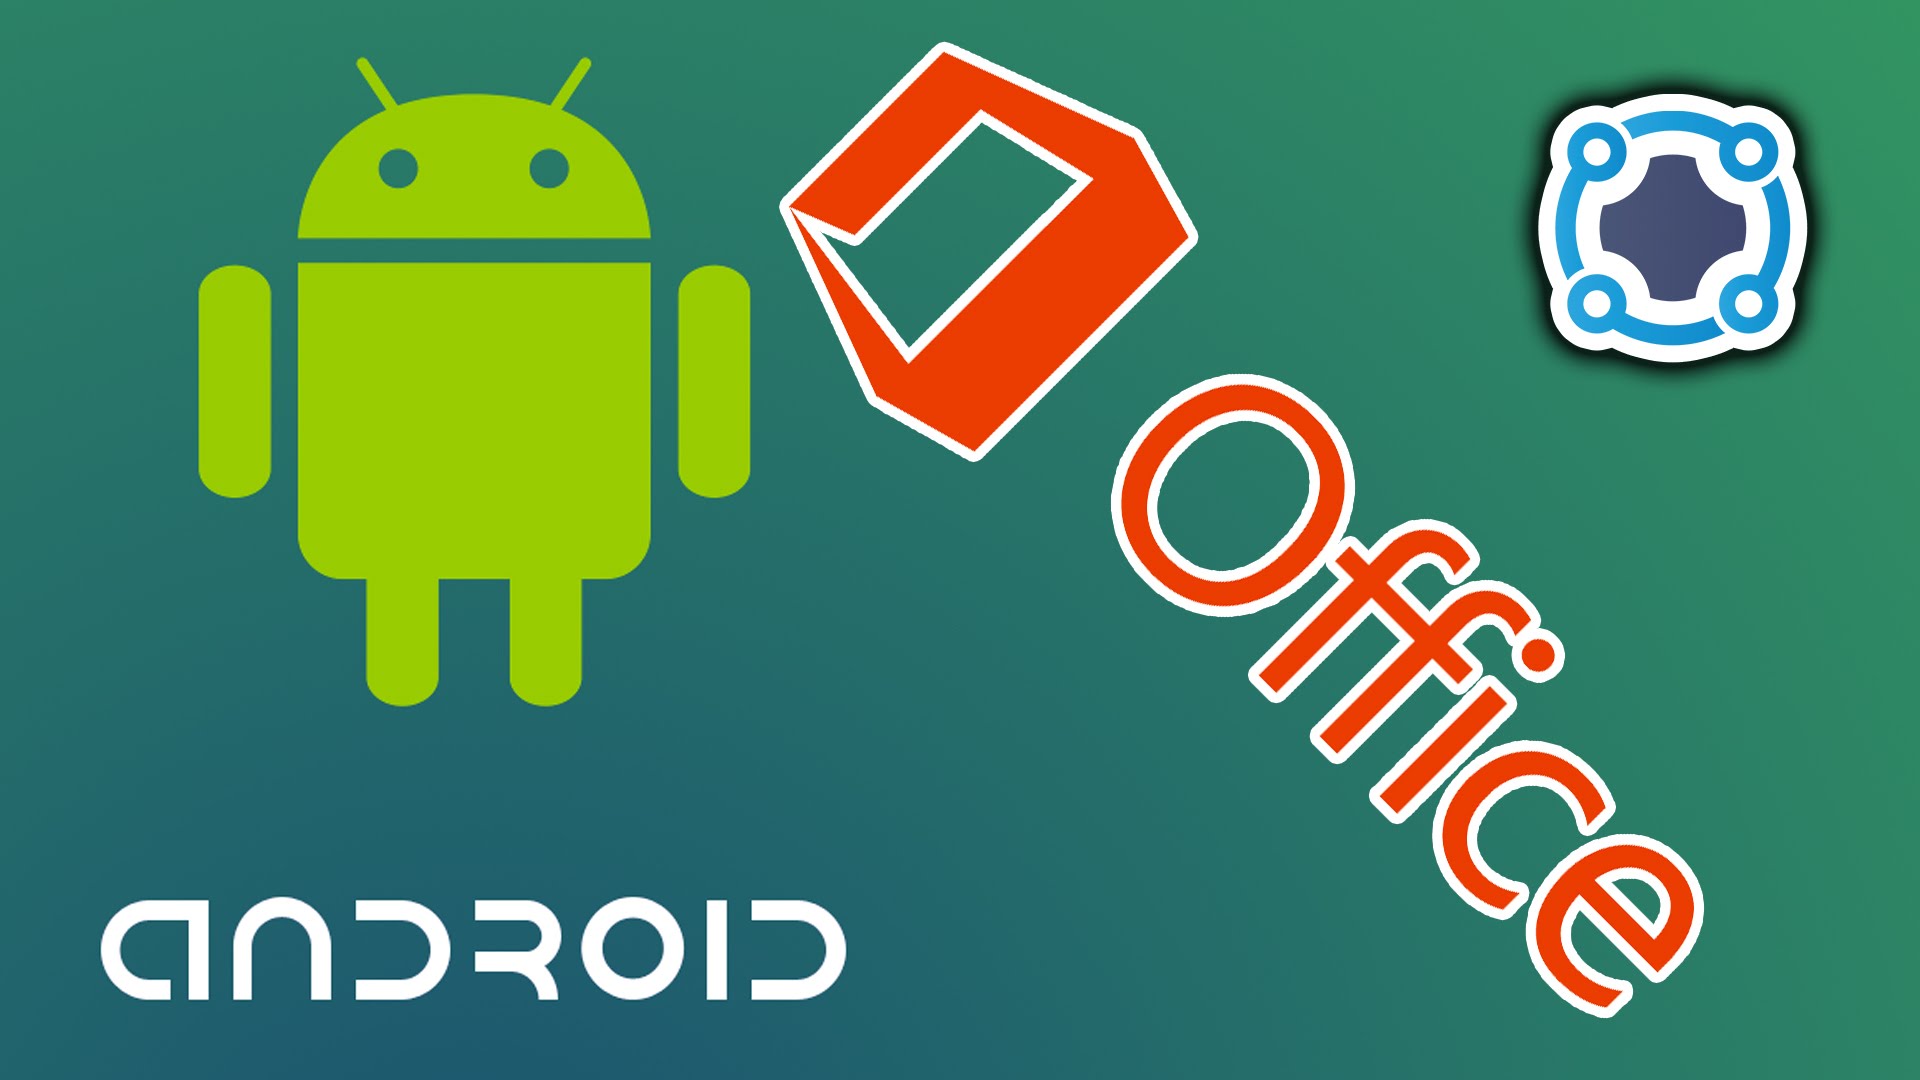 Microsoft Announces Office For Android